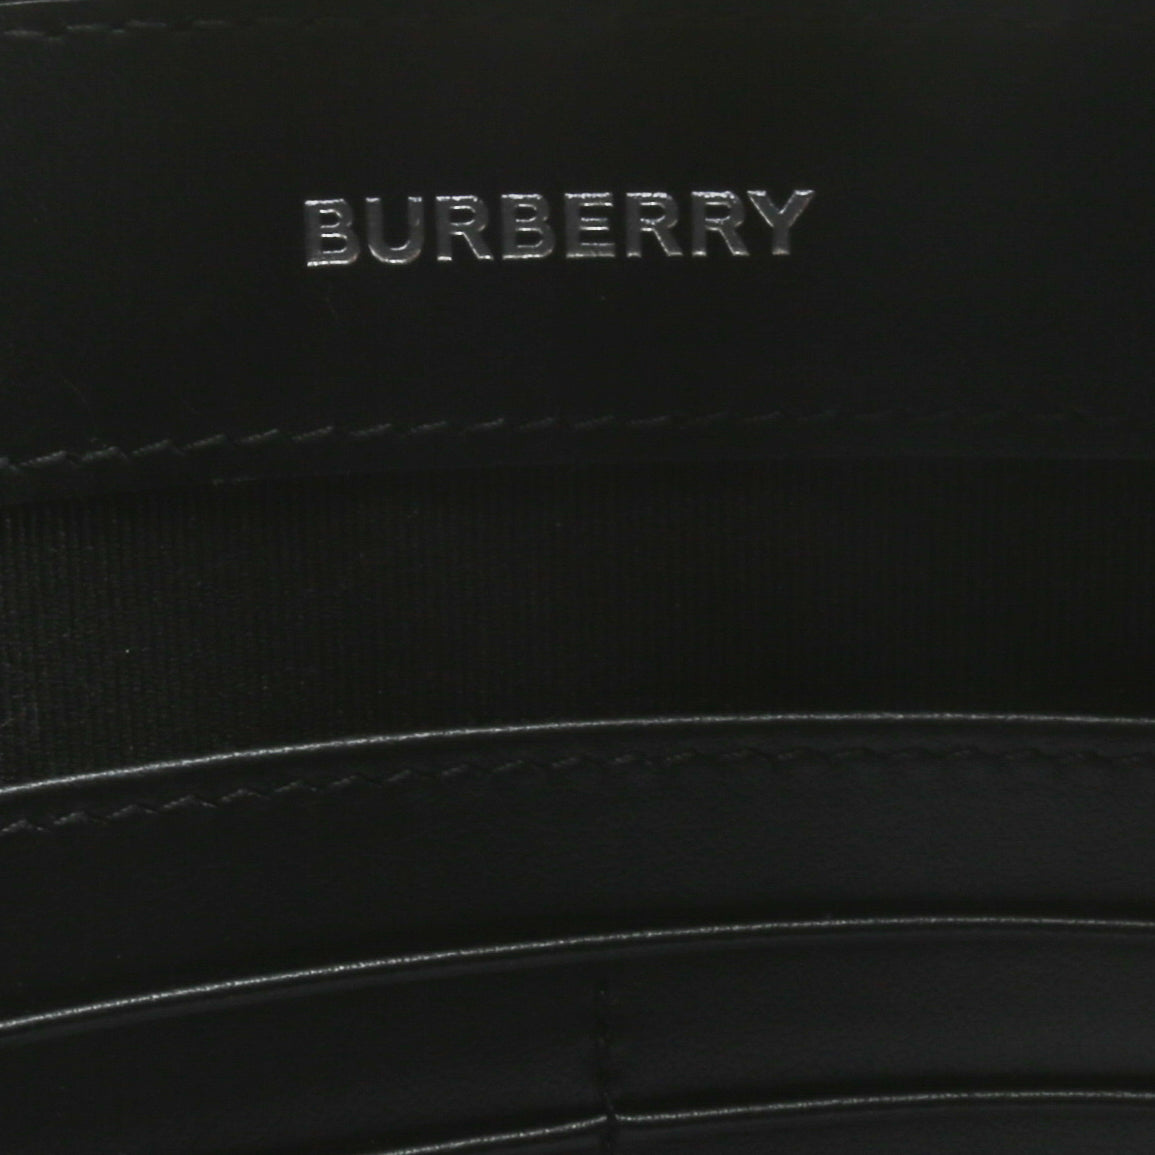 BURBERRY Embossed Leather Pouch - Black